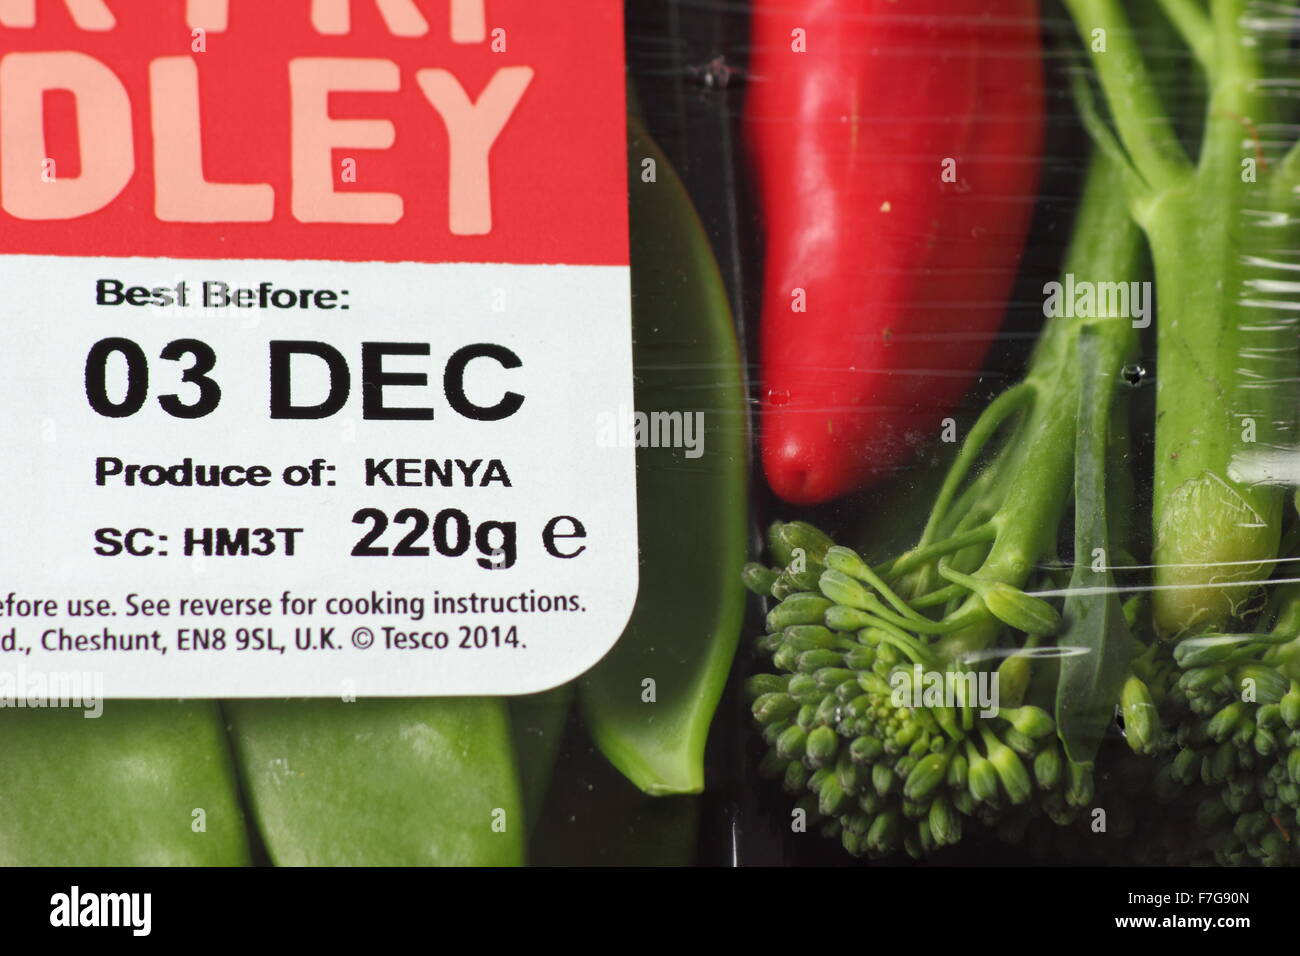 Best before label on packaging of a Stir Fry Medley of Kenyan vegetables from Tesco supermarket, England UK - editorial use only Stock Photo